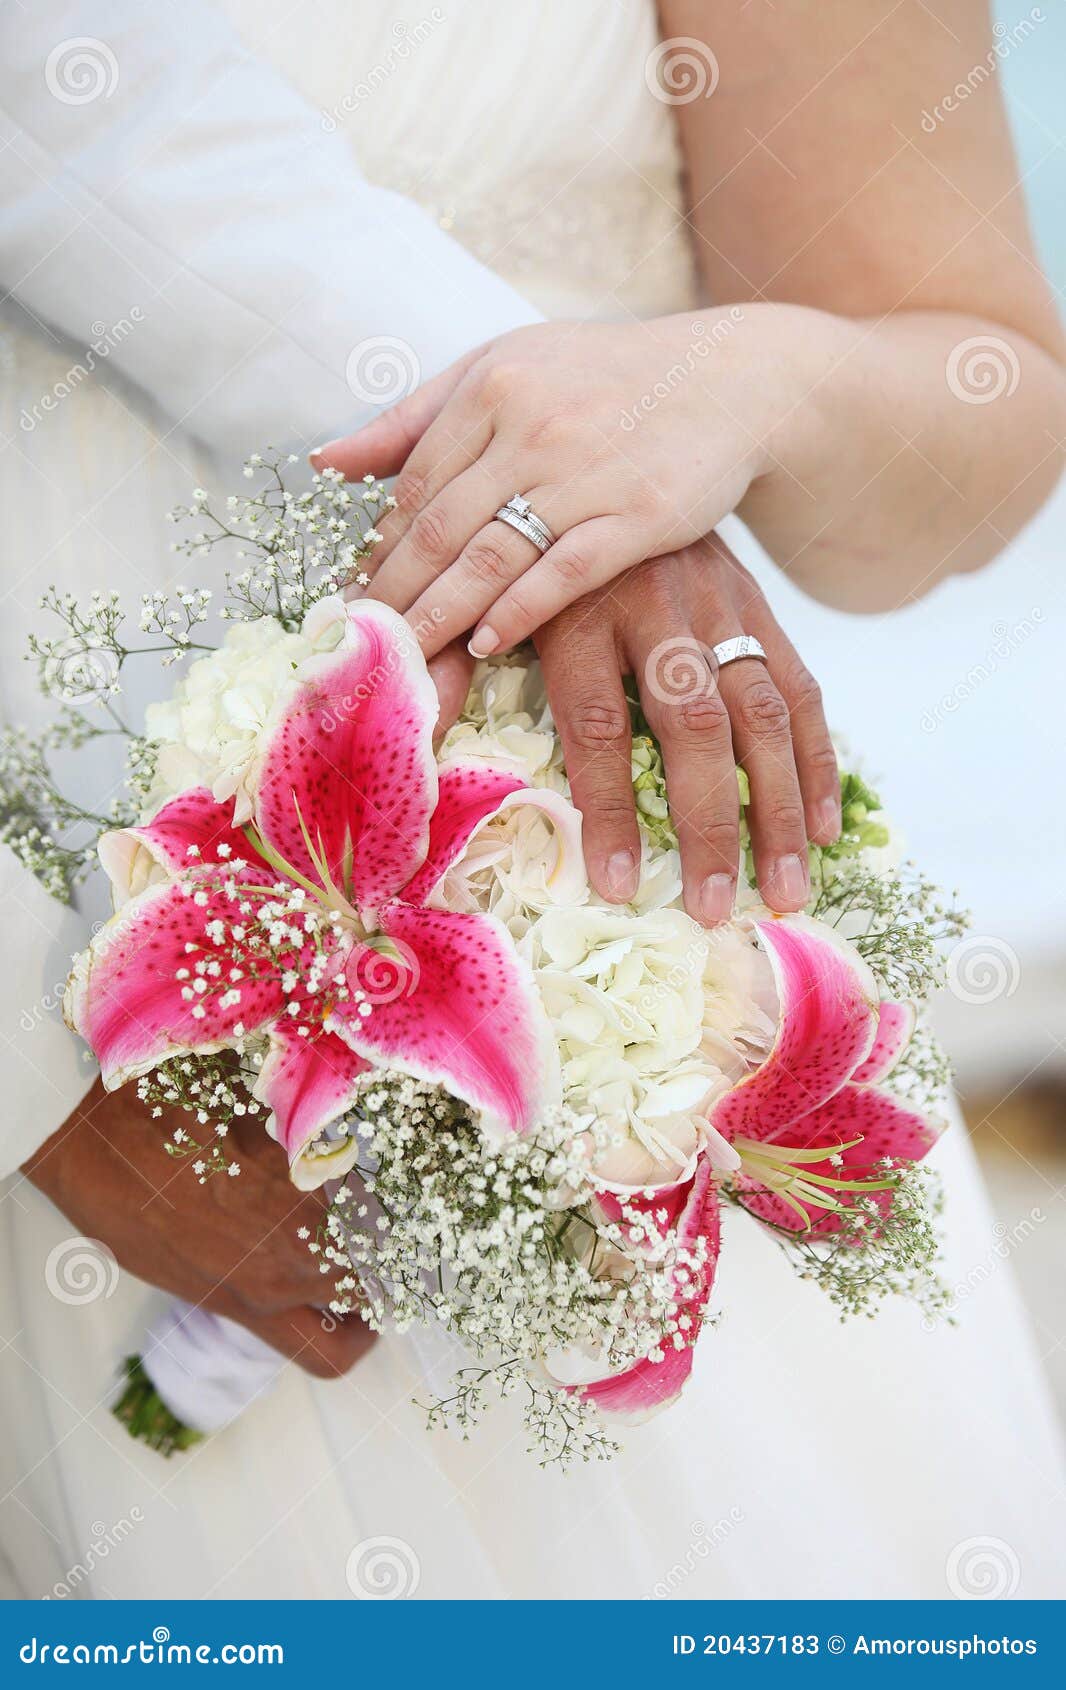 Wedding Hands and Rings on Bouquet - Tropical Stock Image - Image of fancy,  groom: 20437183